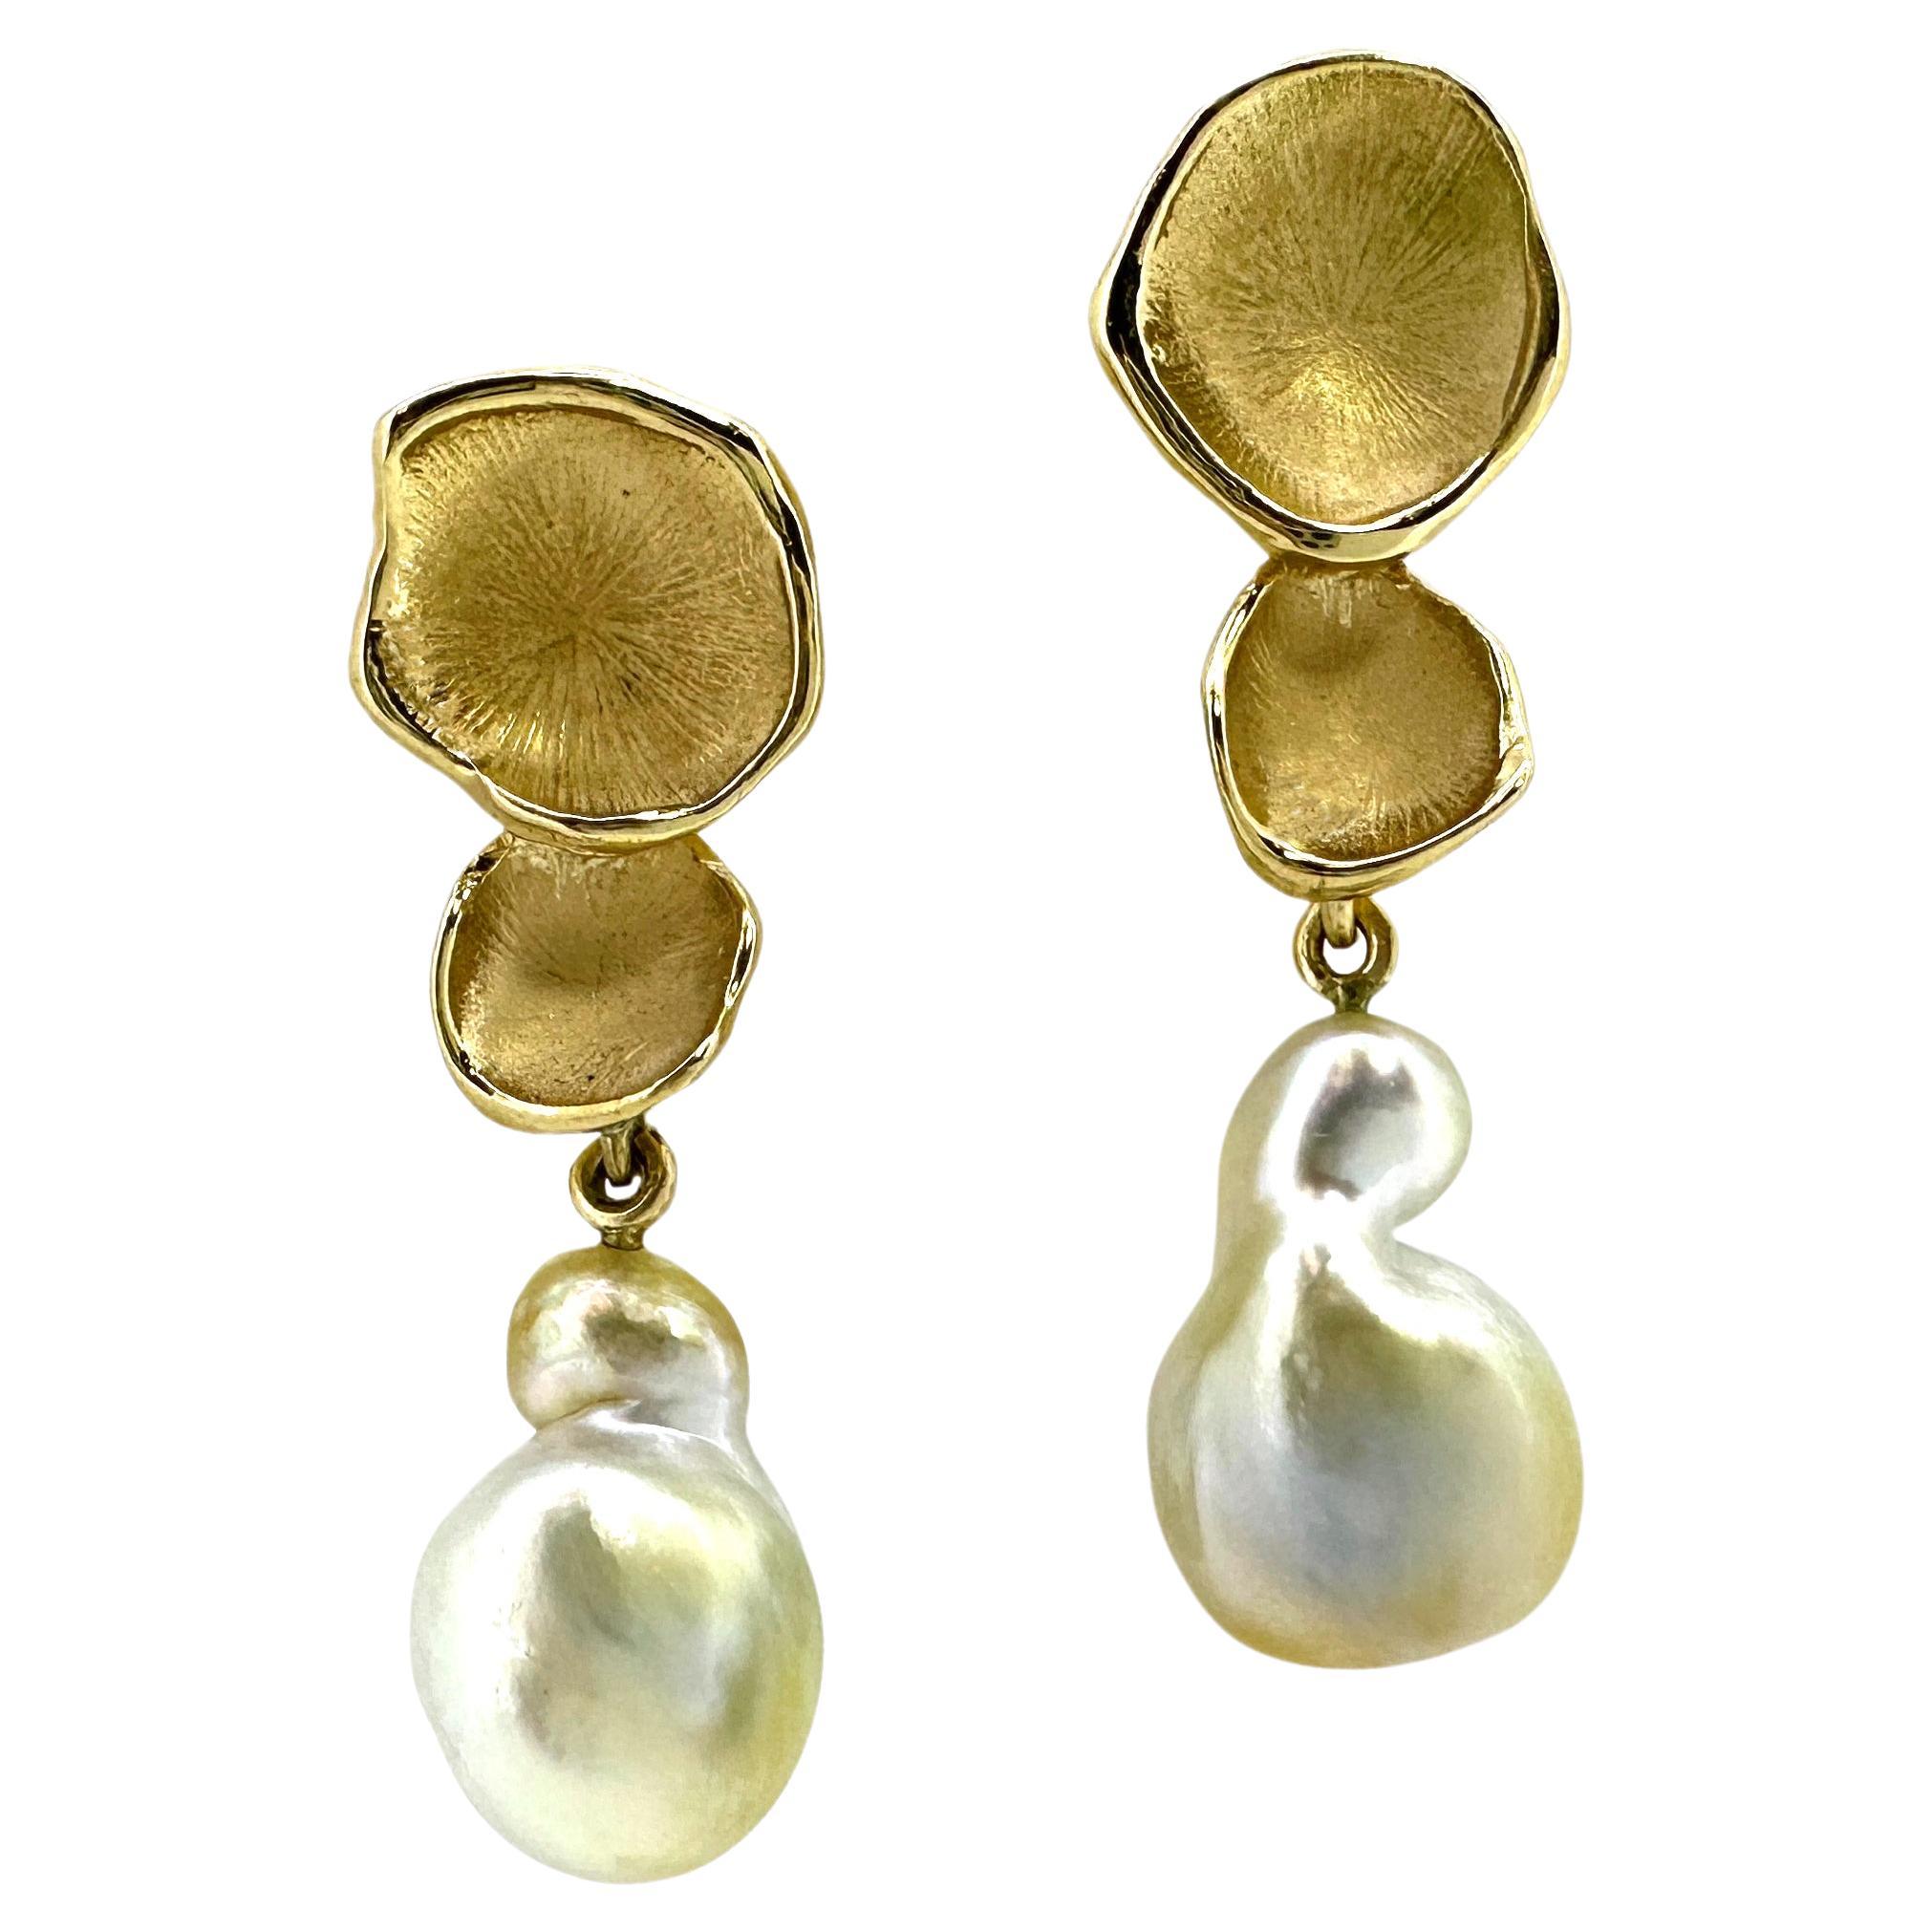 "Short Stack" Earrings in 18K Gold with White & Gold Baroque South Sea Pearls For Sale